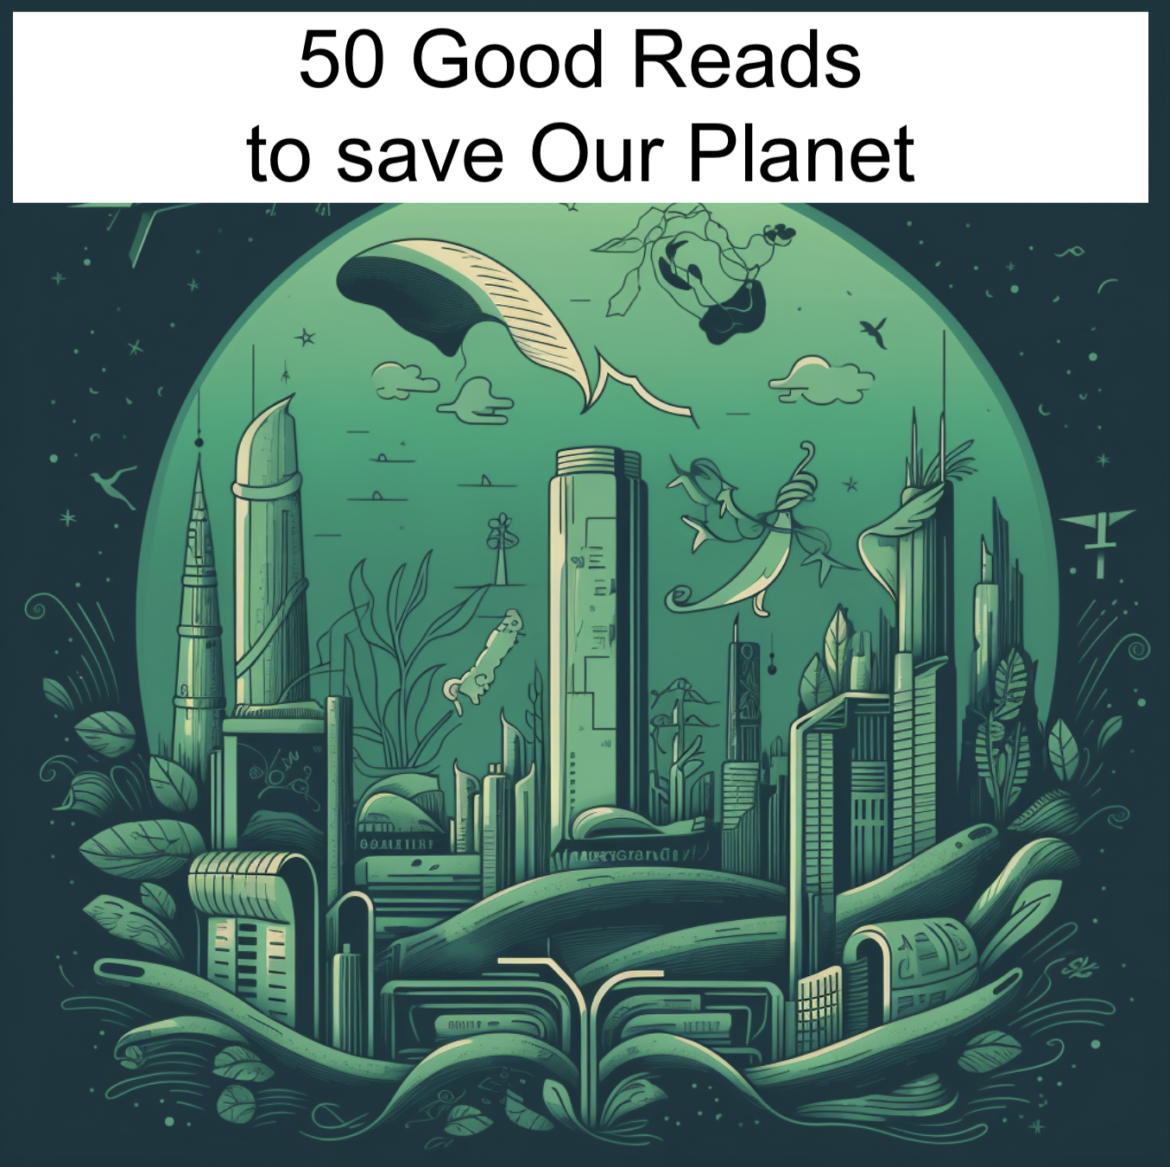 Curating 50 Good, Green Reads for a Sustainable Planet